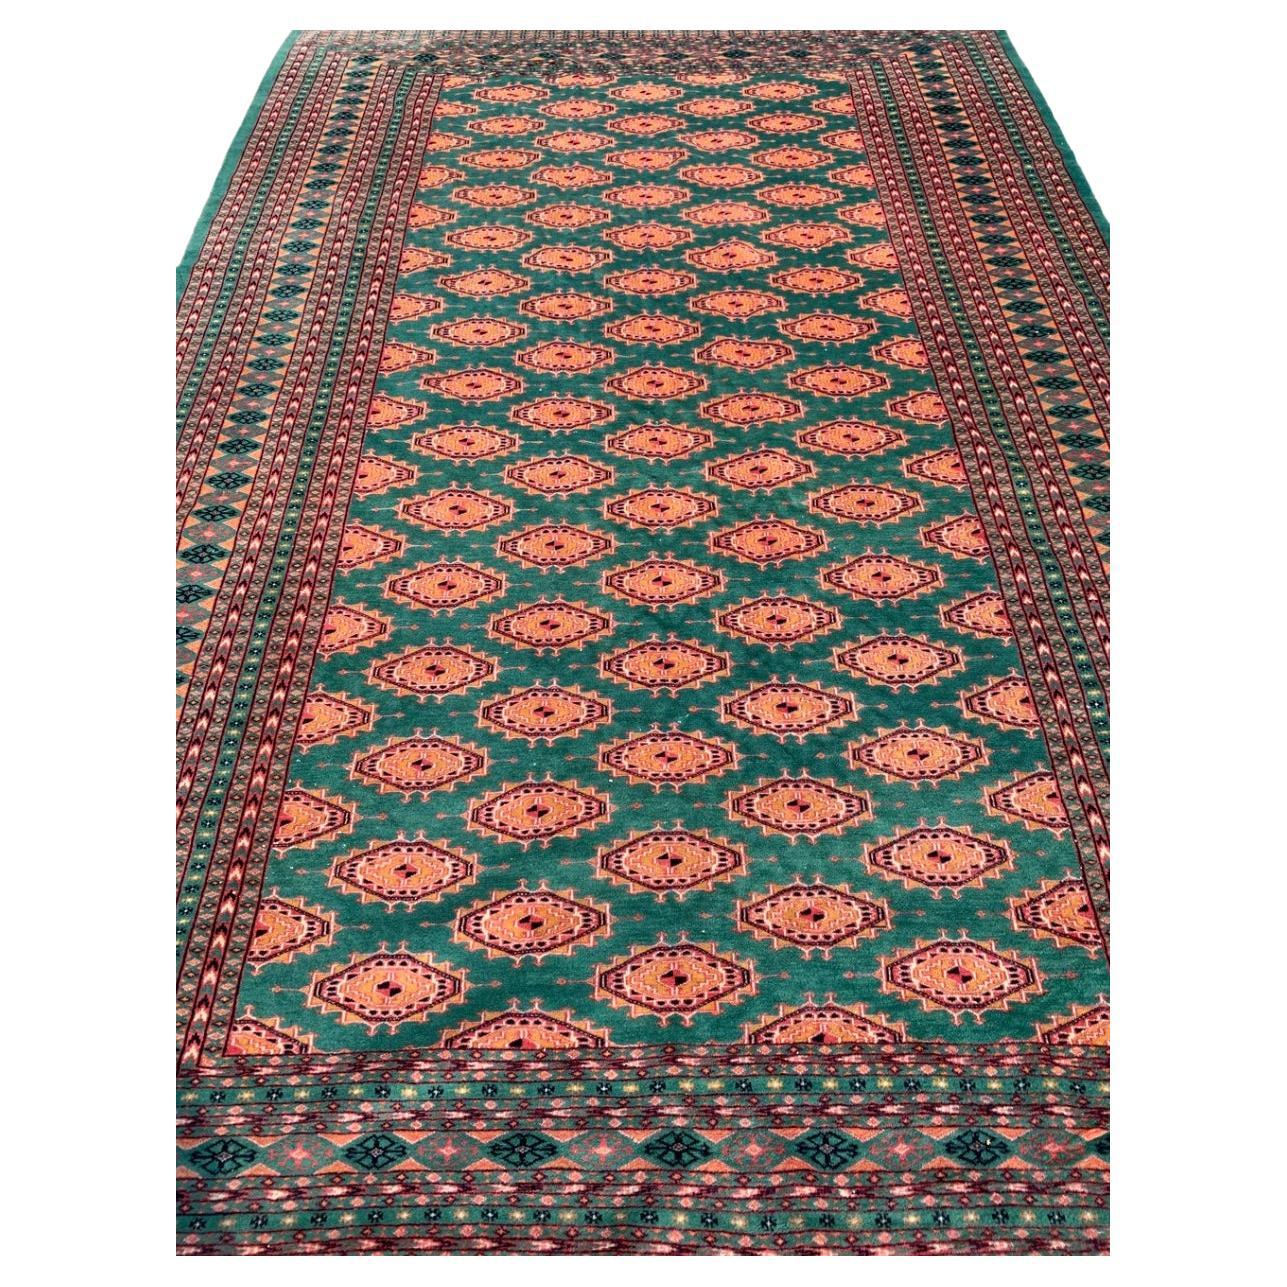 Pakistani Bukhara Carpet in Orange and Green from the 1970s For Sale